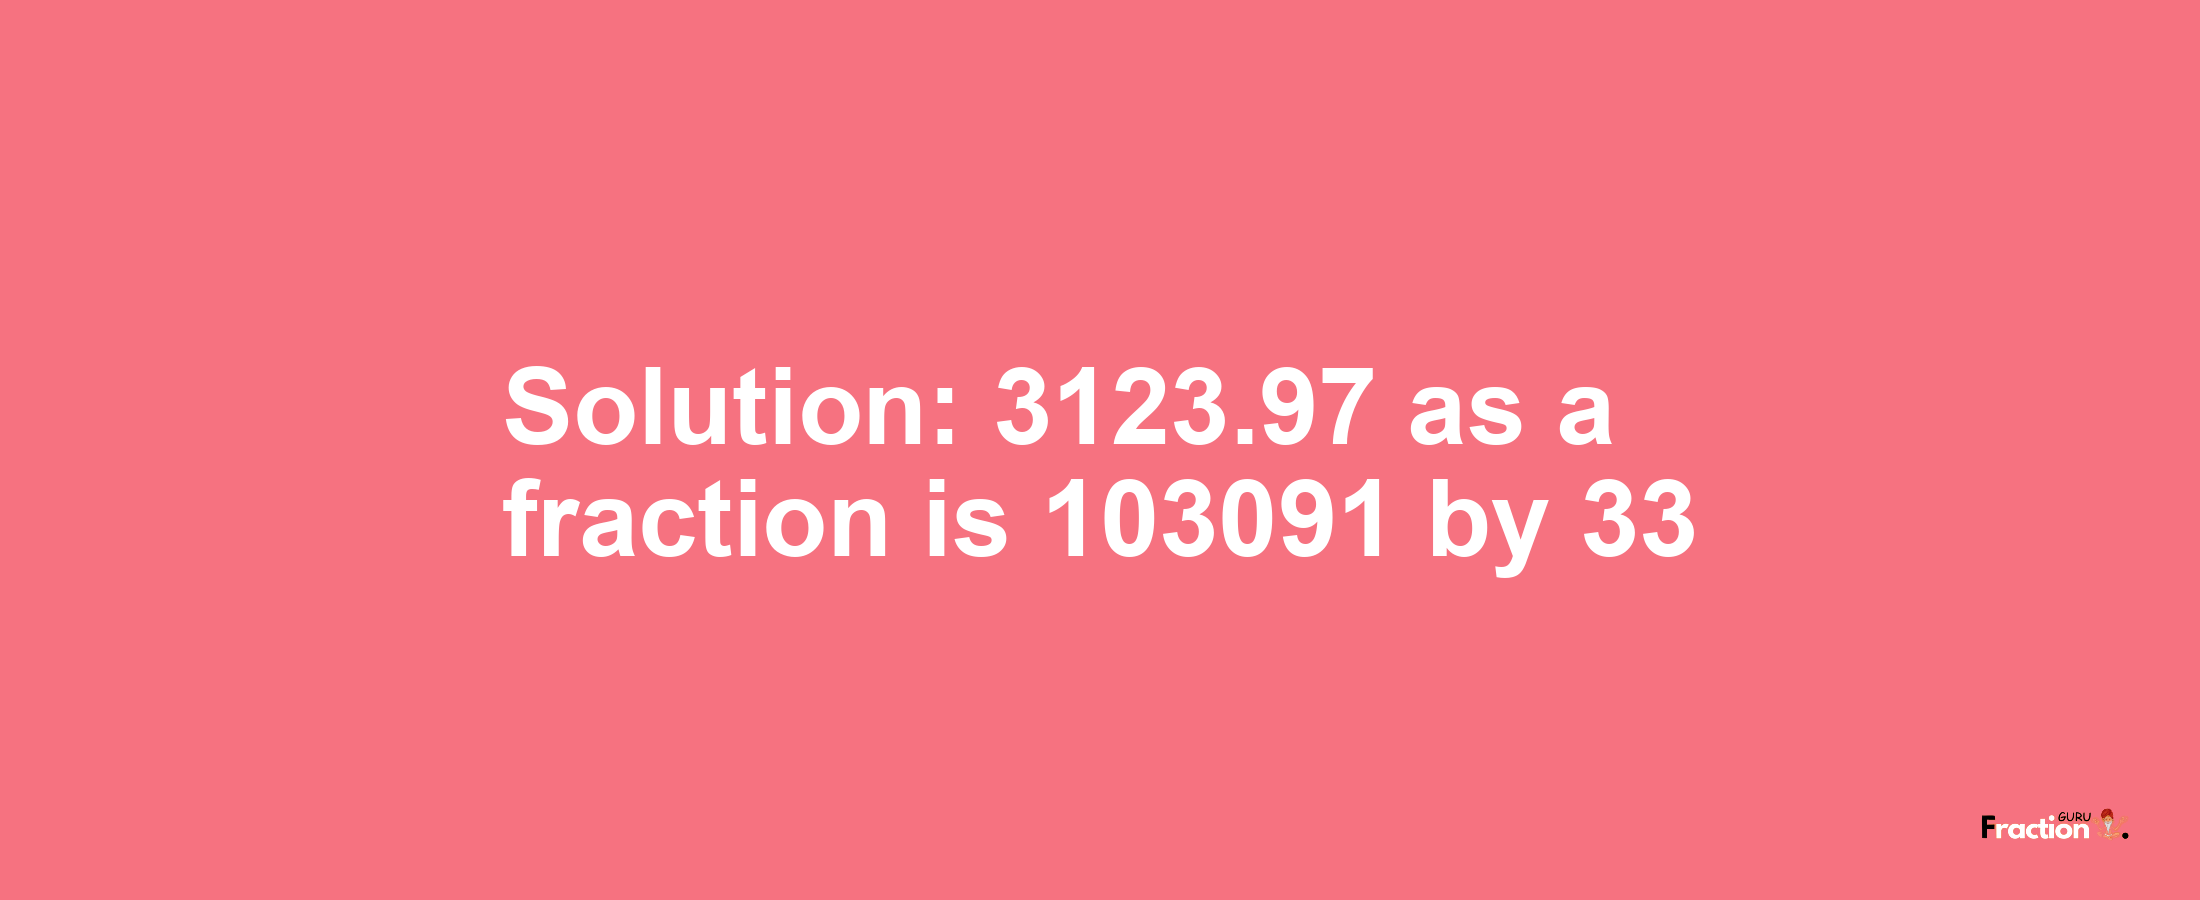 Solution:3123.97 as a fraction is 103091/33